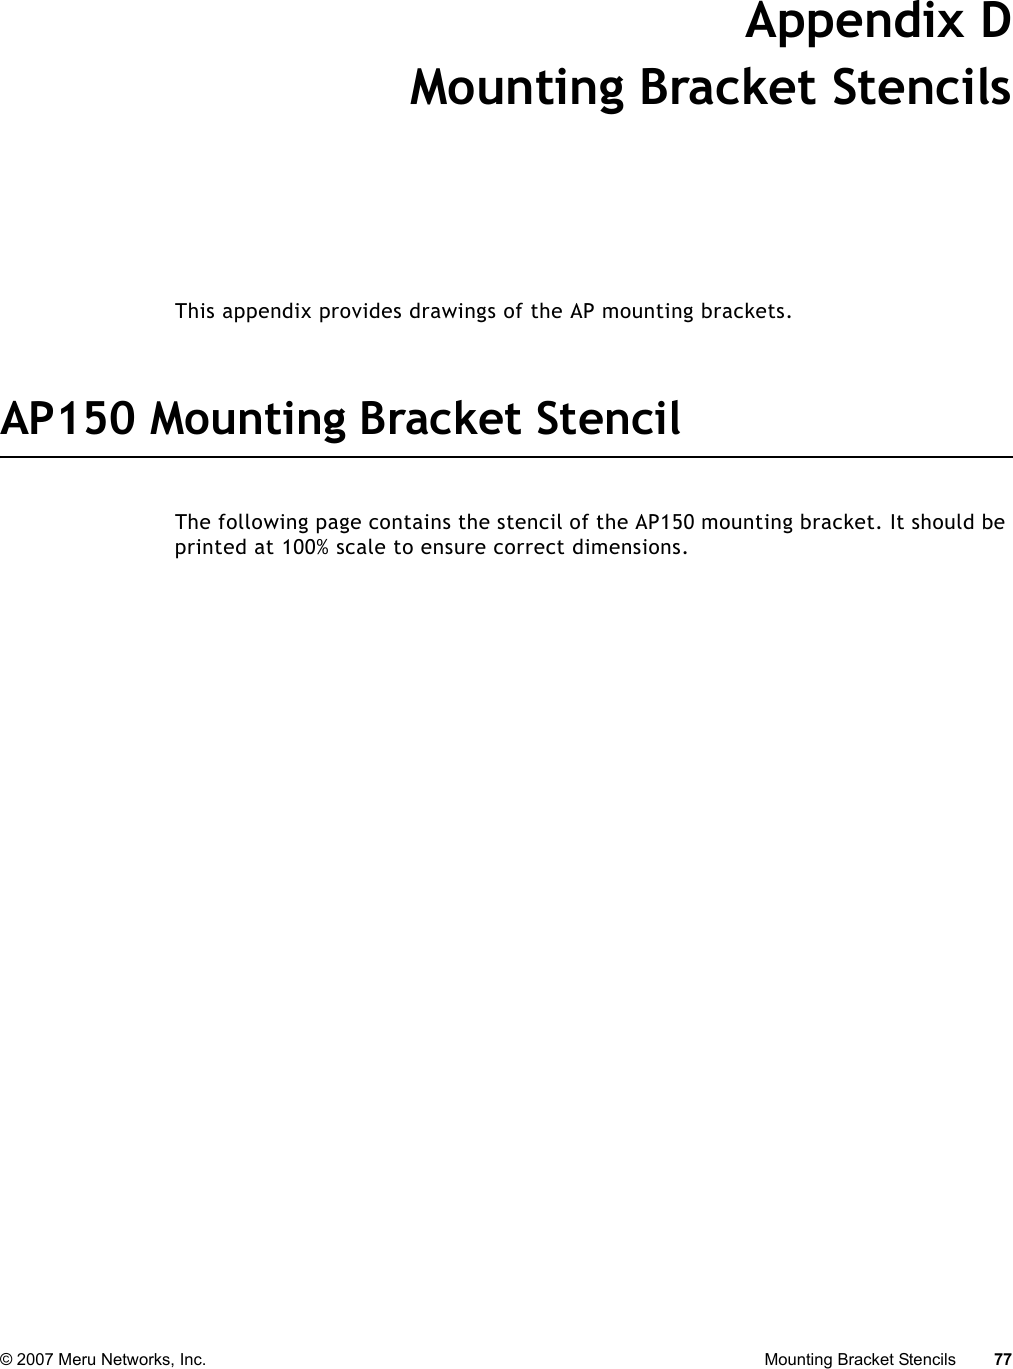 © 2007 Meru Networks, Inc. Mounting Bracket Stencils 77 Appendix DMounting Bracket StencilsB-1This appendix provides drawings of the AP mounting brackets.AP150 Mounting Bracket StencilThe following page contains the stencil of the AP150 mounting bracket. It should be printed at 100% scale to ensure correct dimensions.